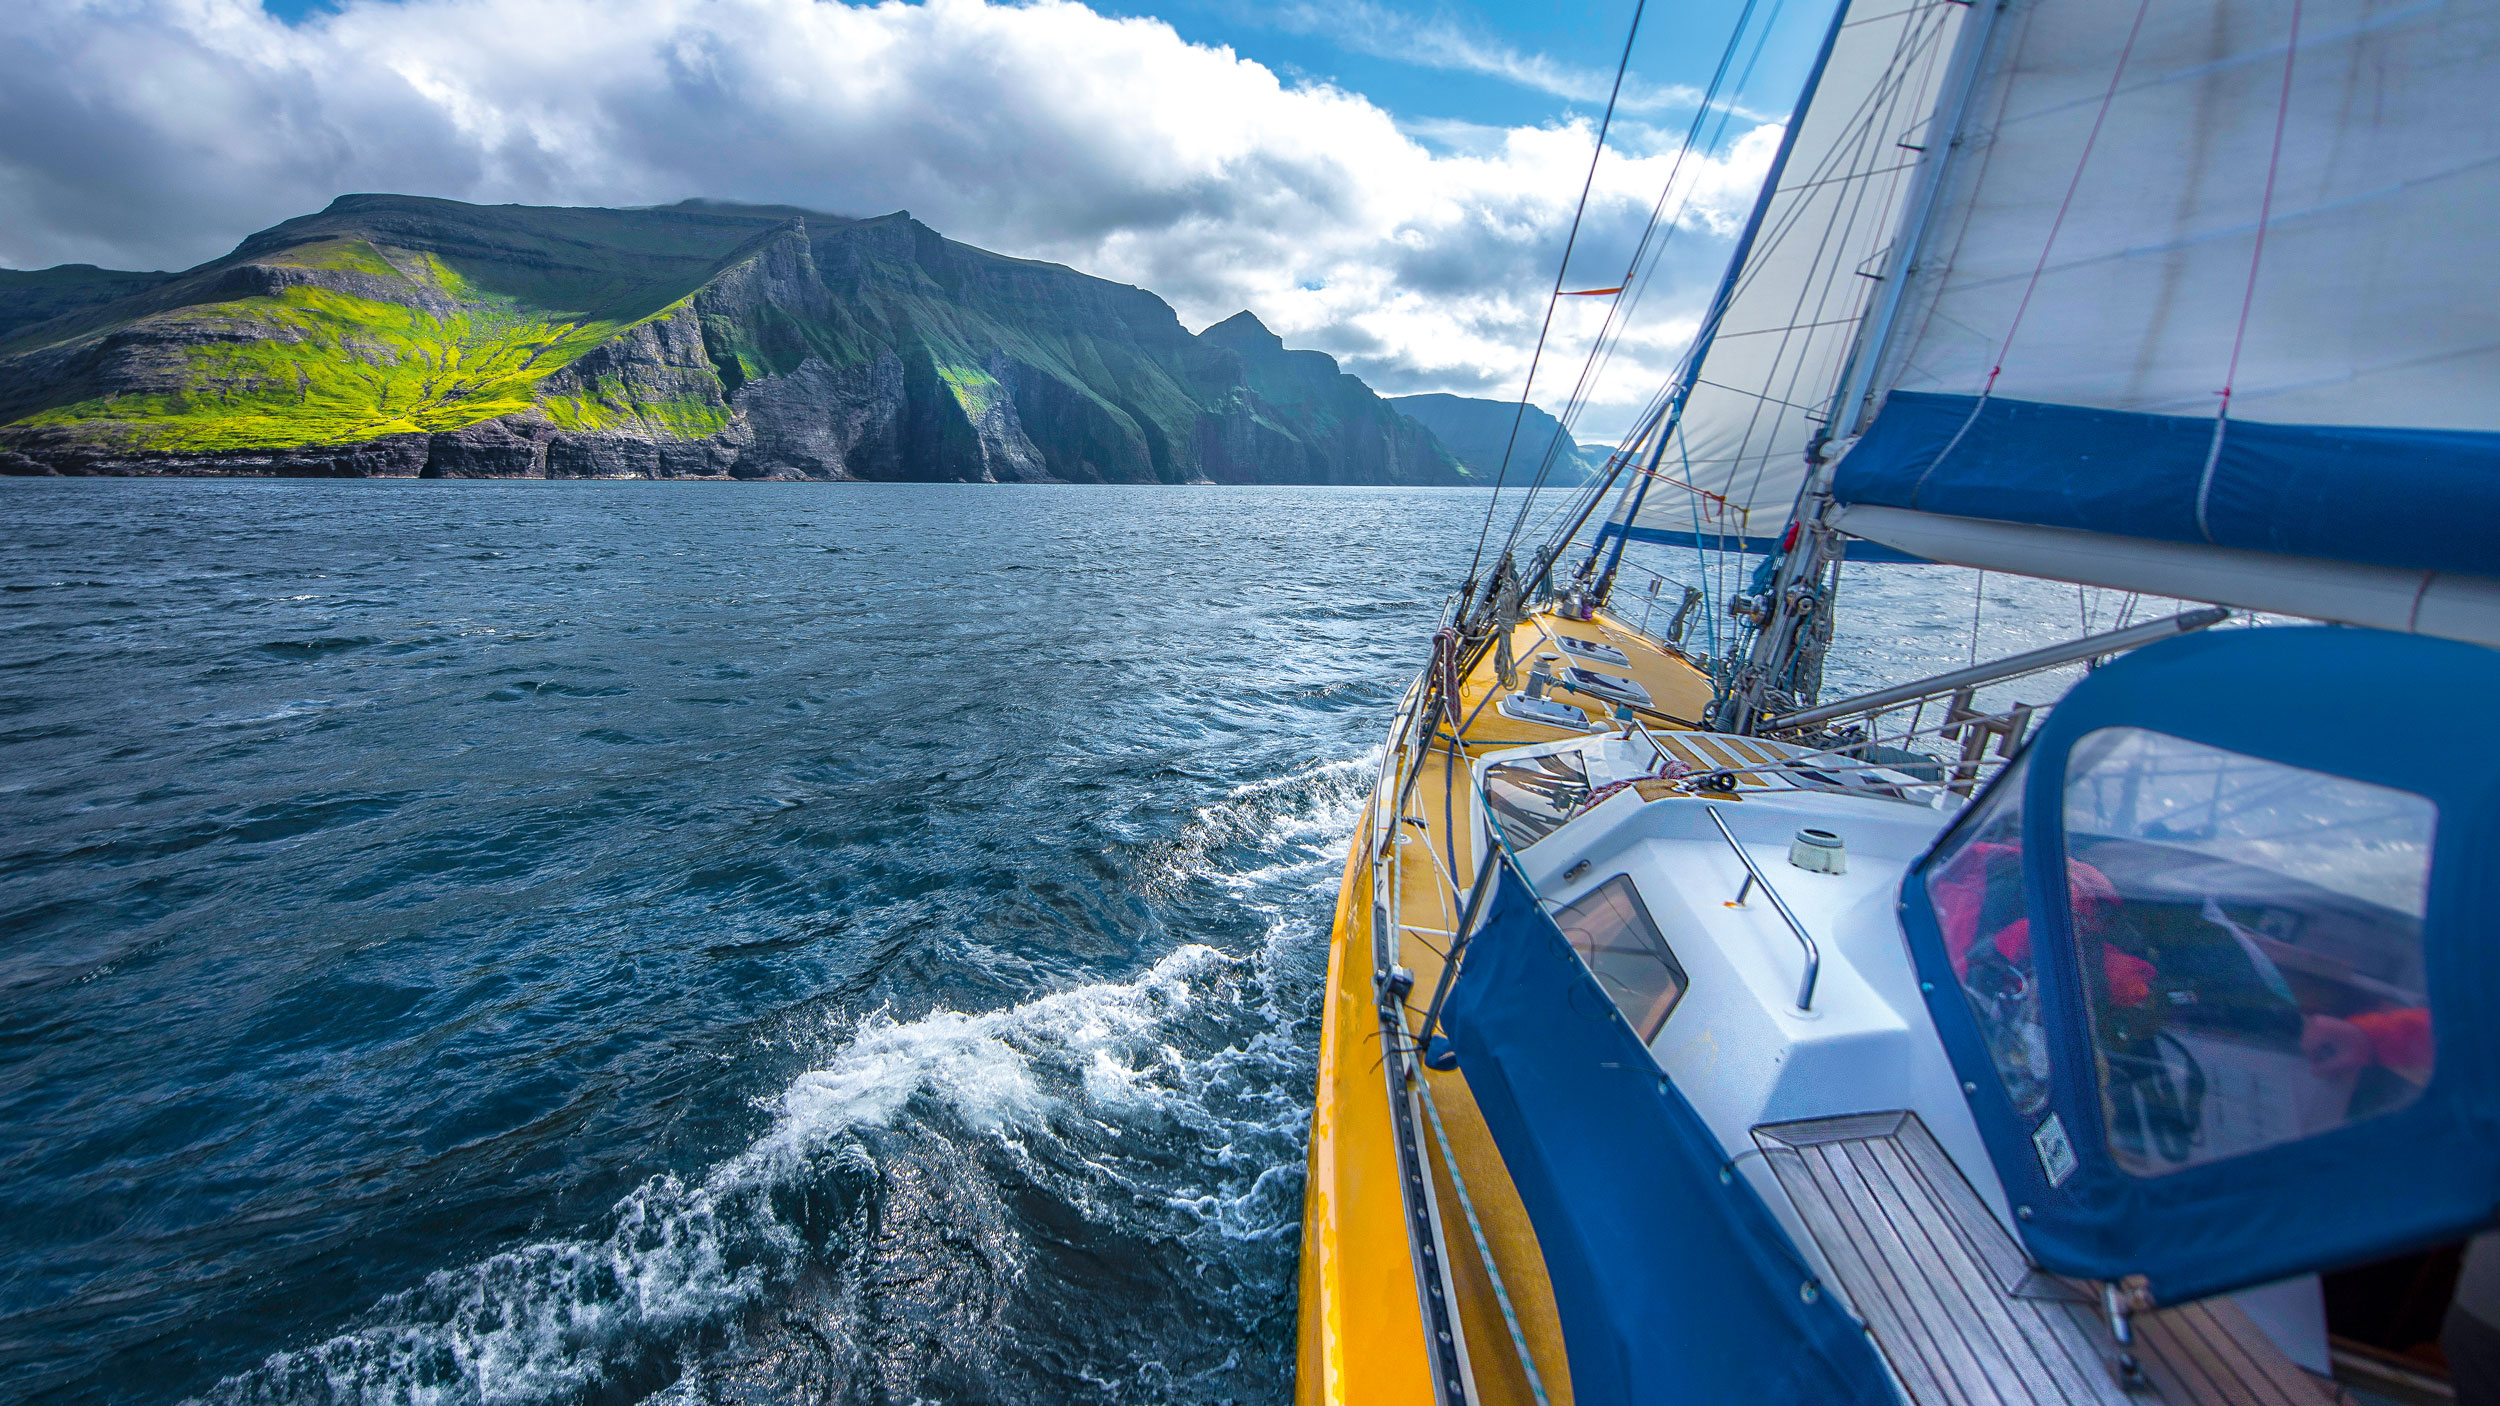 Yachting The Faroe Islands   Rugged Beauty In The North Atlantic.